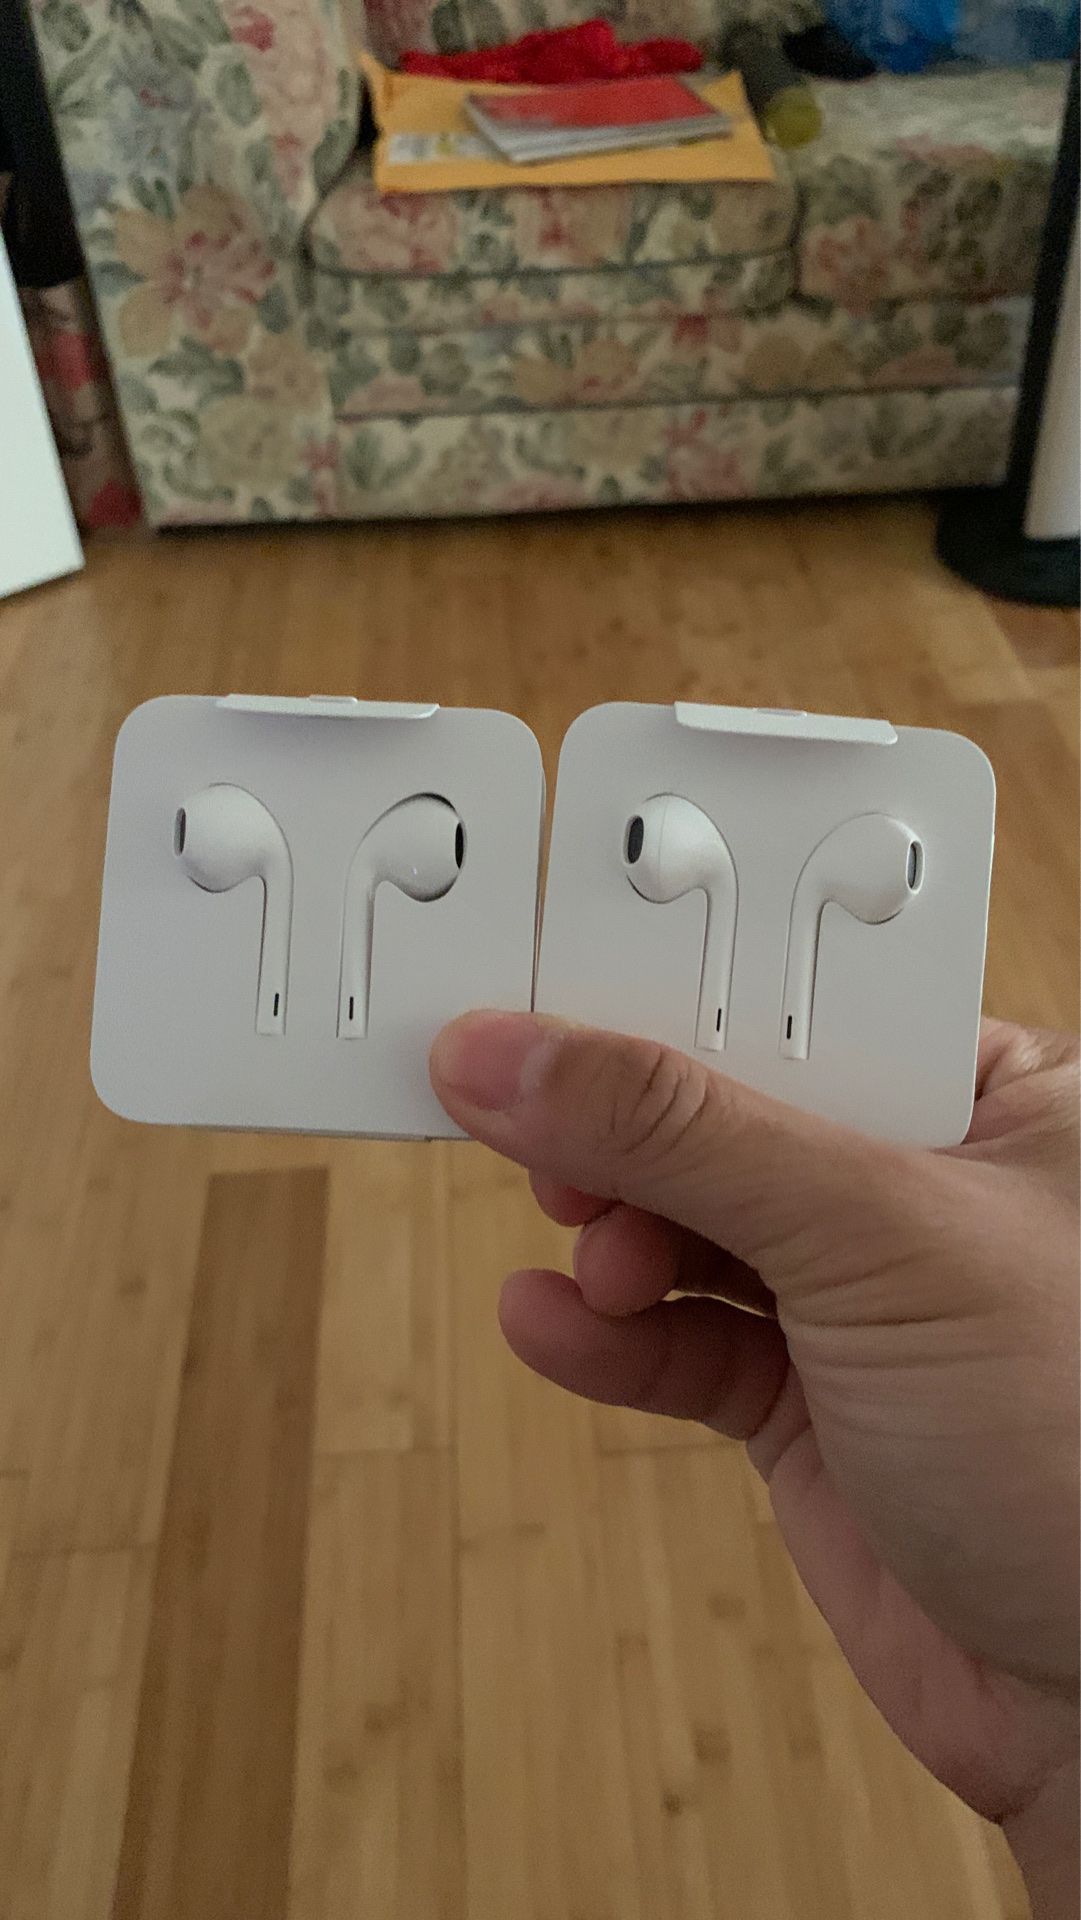 (2) new Apple headphones with lightning connector